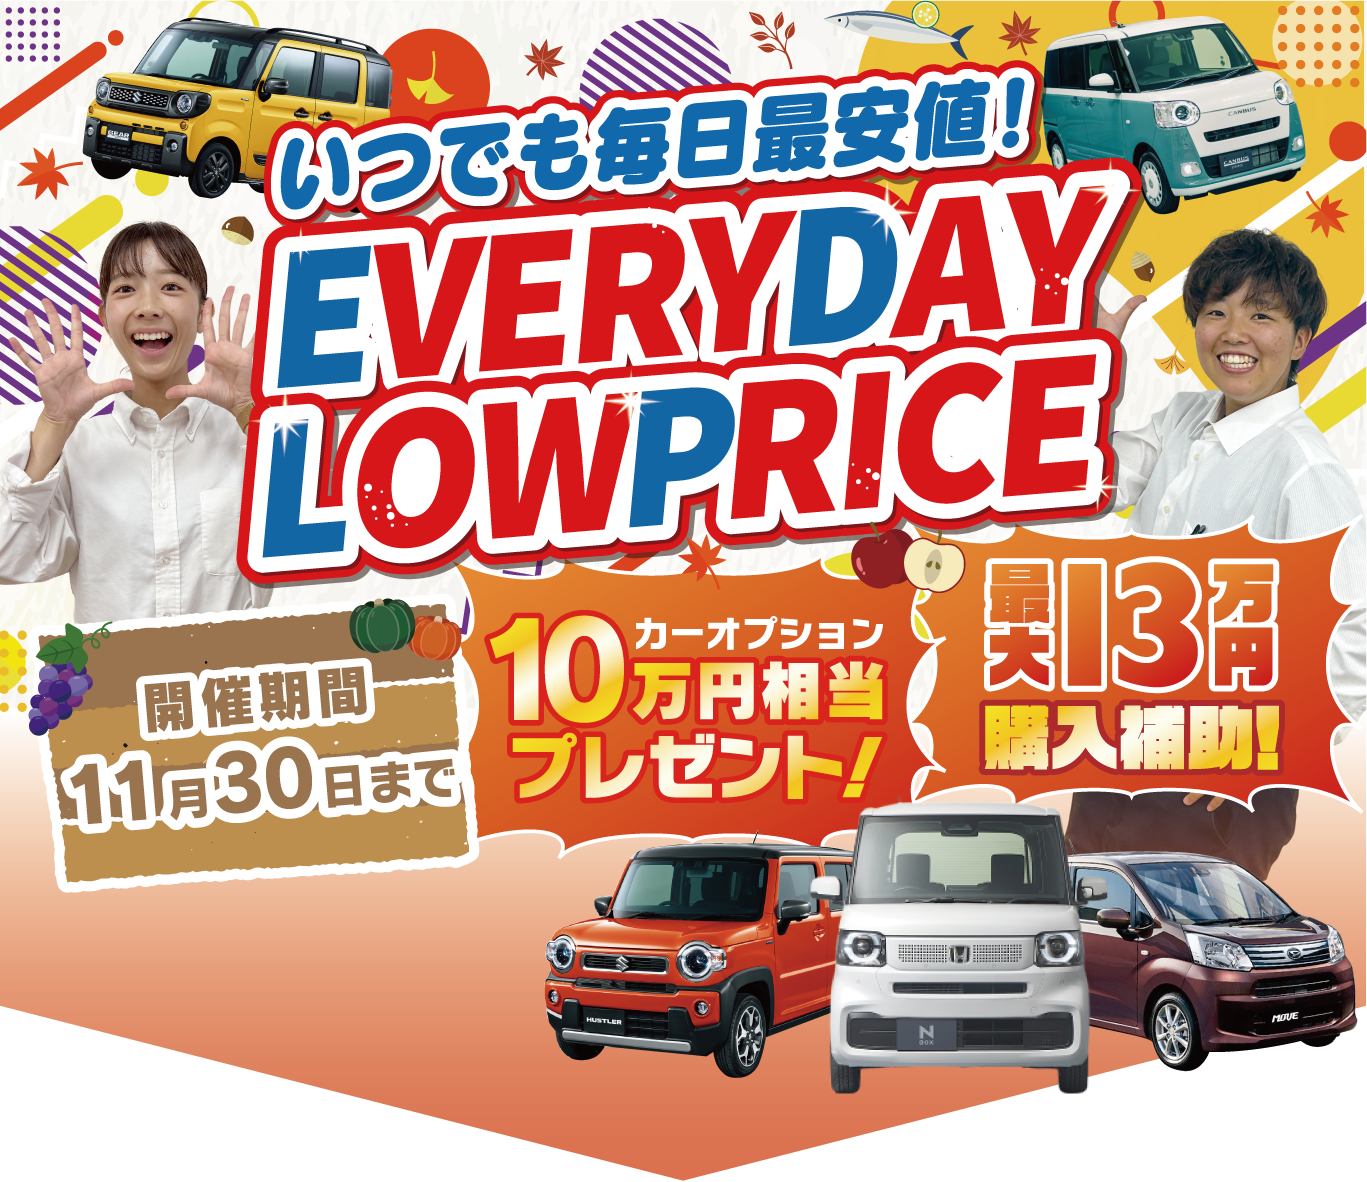 EVERYDAY LOW PRICEフェア開催！